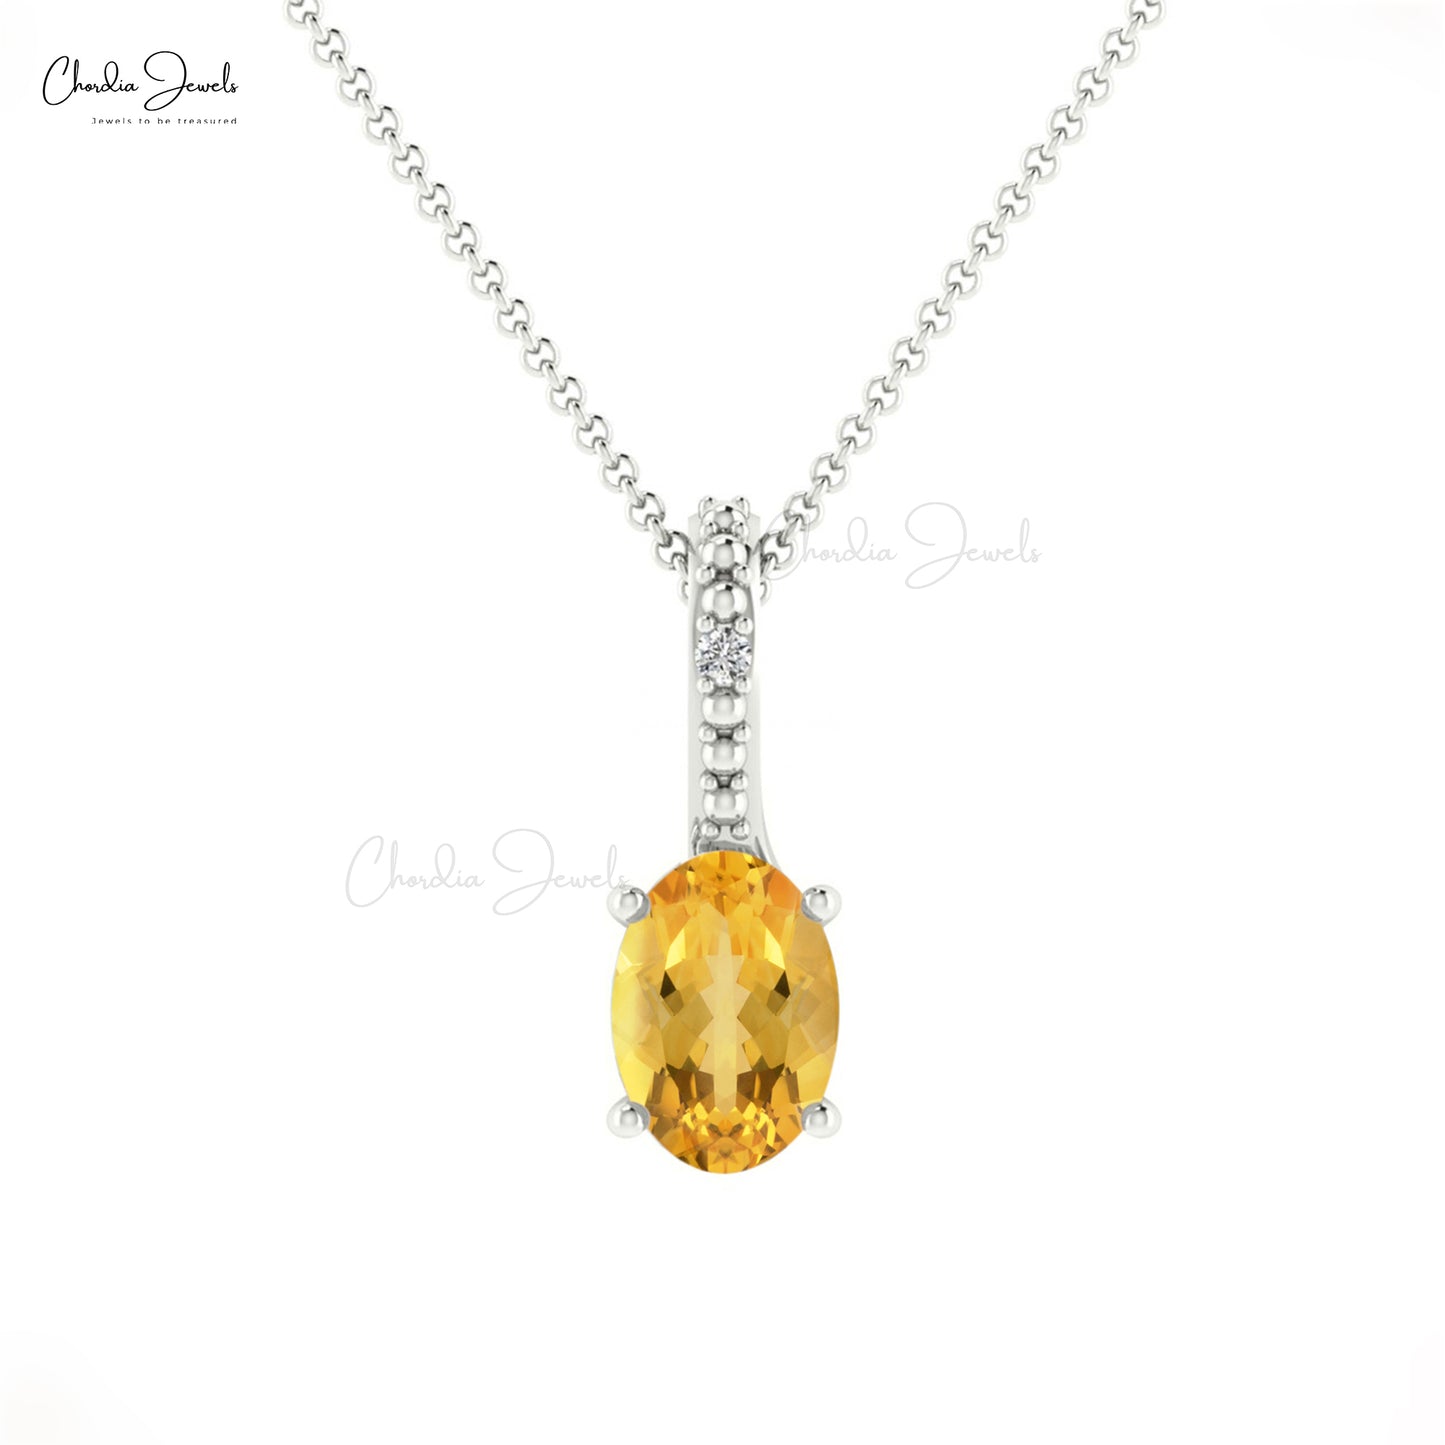 Load image into Gallery viewer, Vintage Elegant Natural White Diamond Hidden Bail Pendant 6x4mm Oval Yellow Citrine Gemstone Pendant Necklace in 14k Solid Gold Gift For Her
